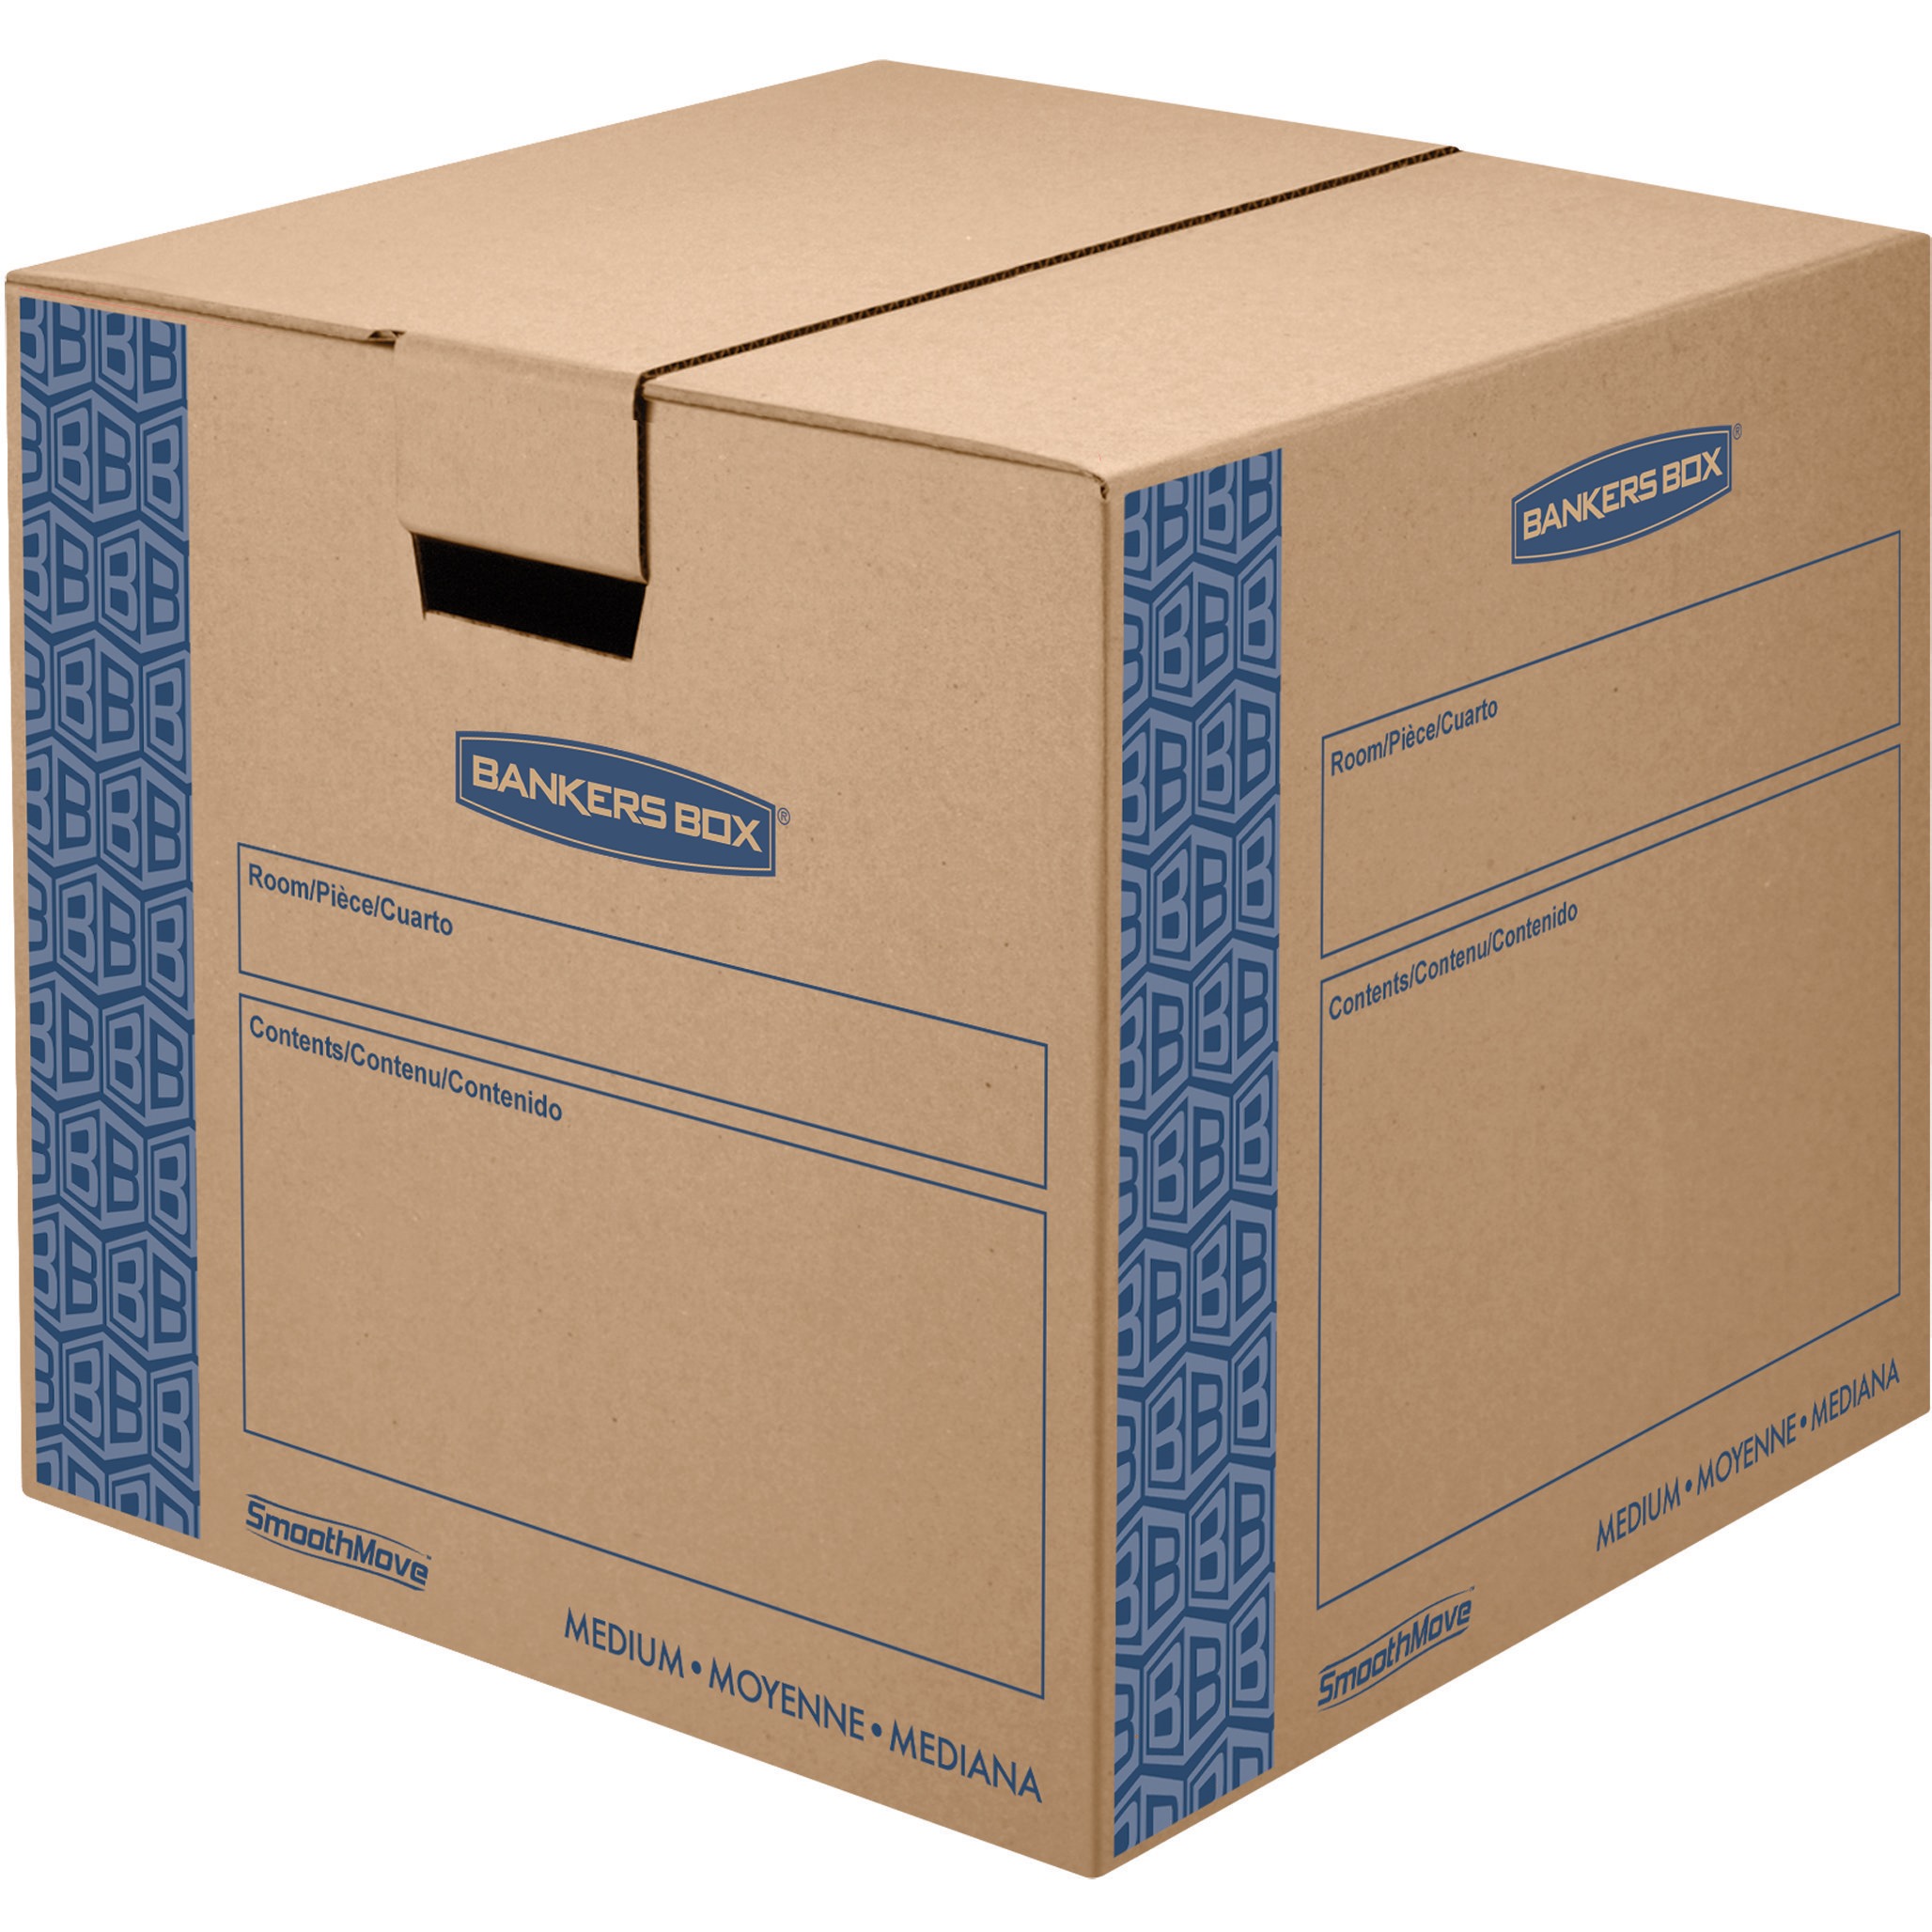 Bankers Box Smooth Move Prime Moving Boxes, Medium - image 1 of 5